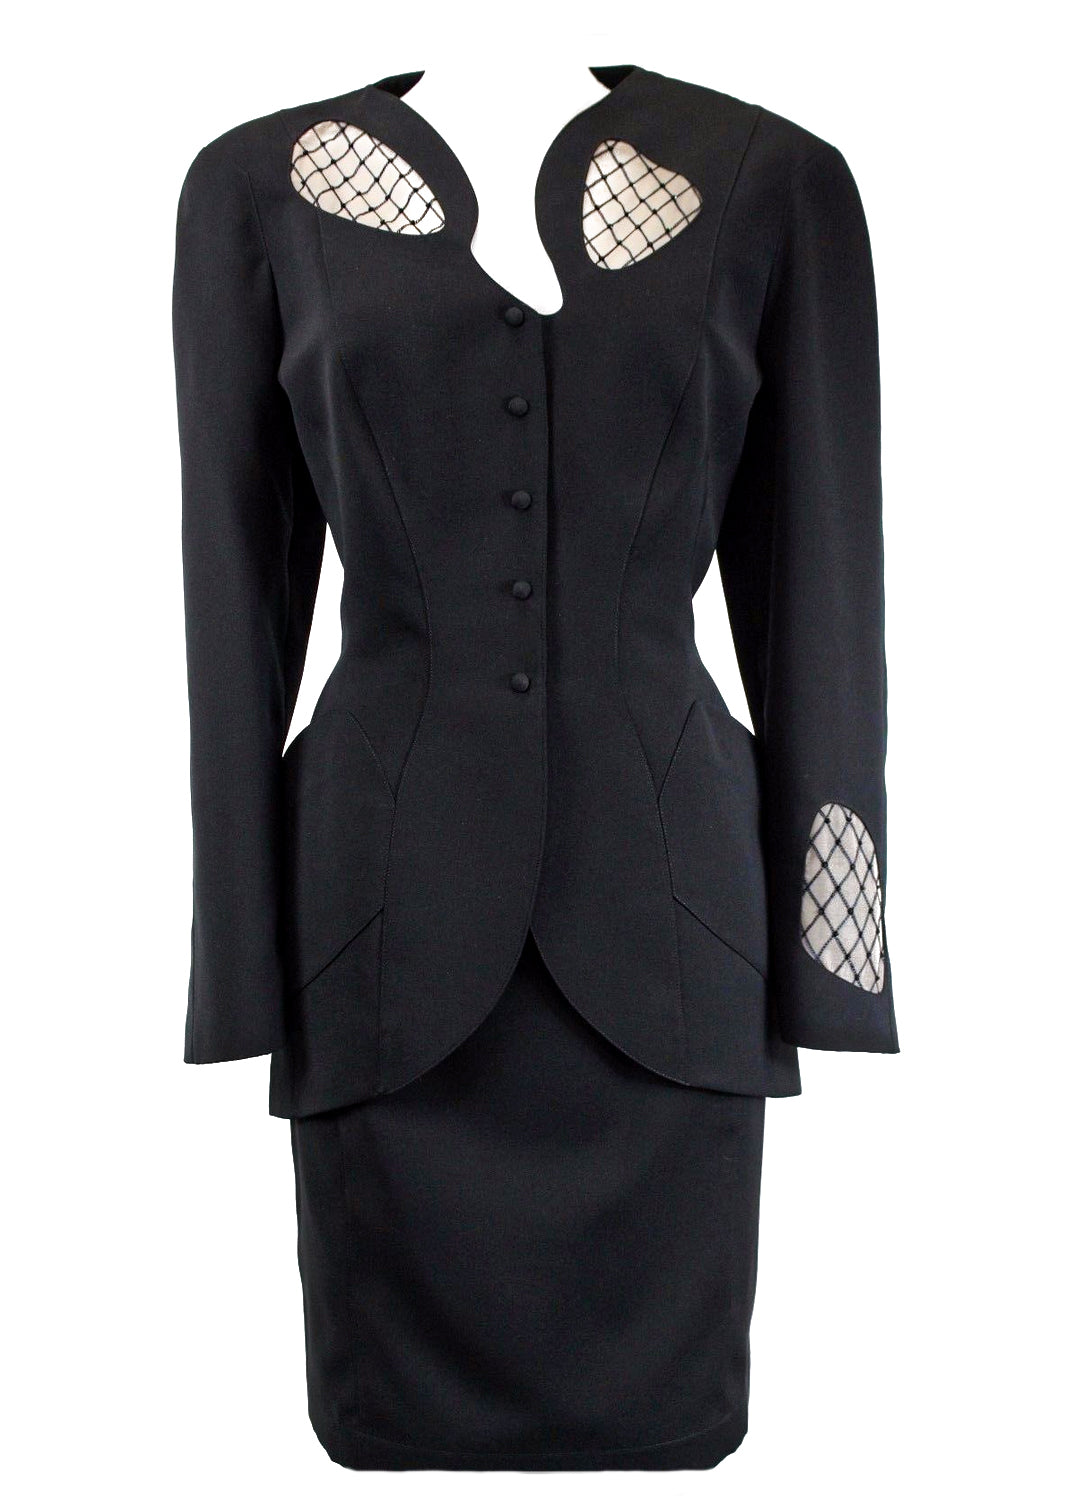 Thierry Mugler Black Suit with Cut-Out Details and Netting 